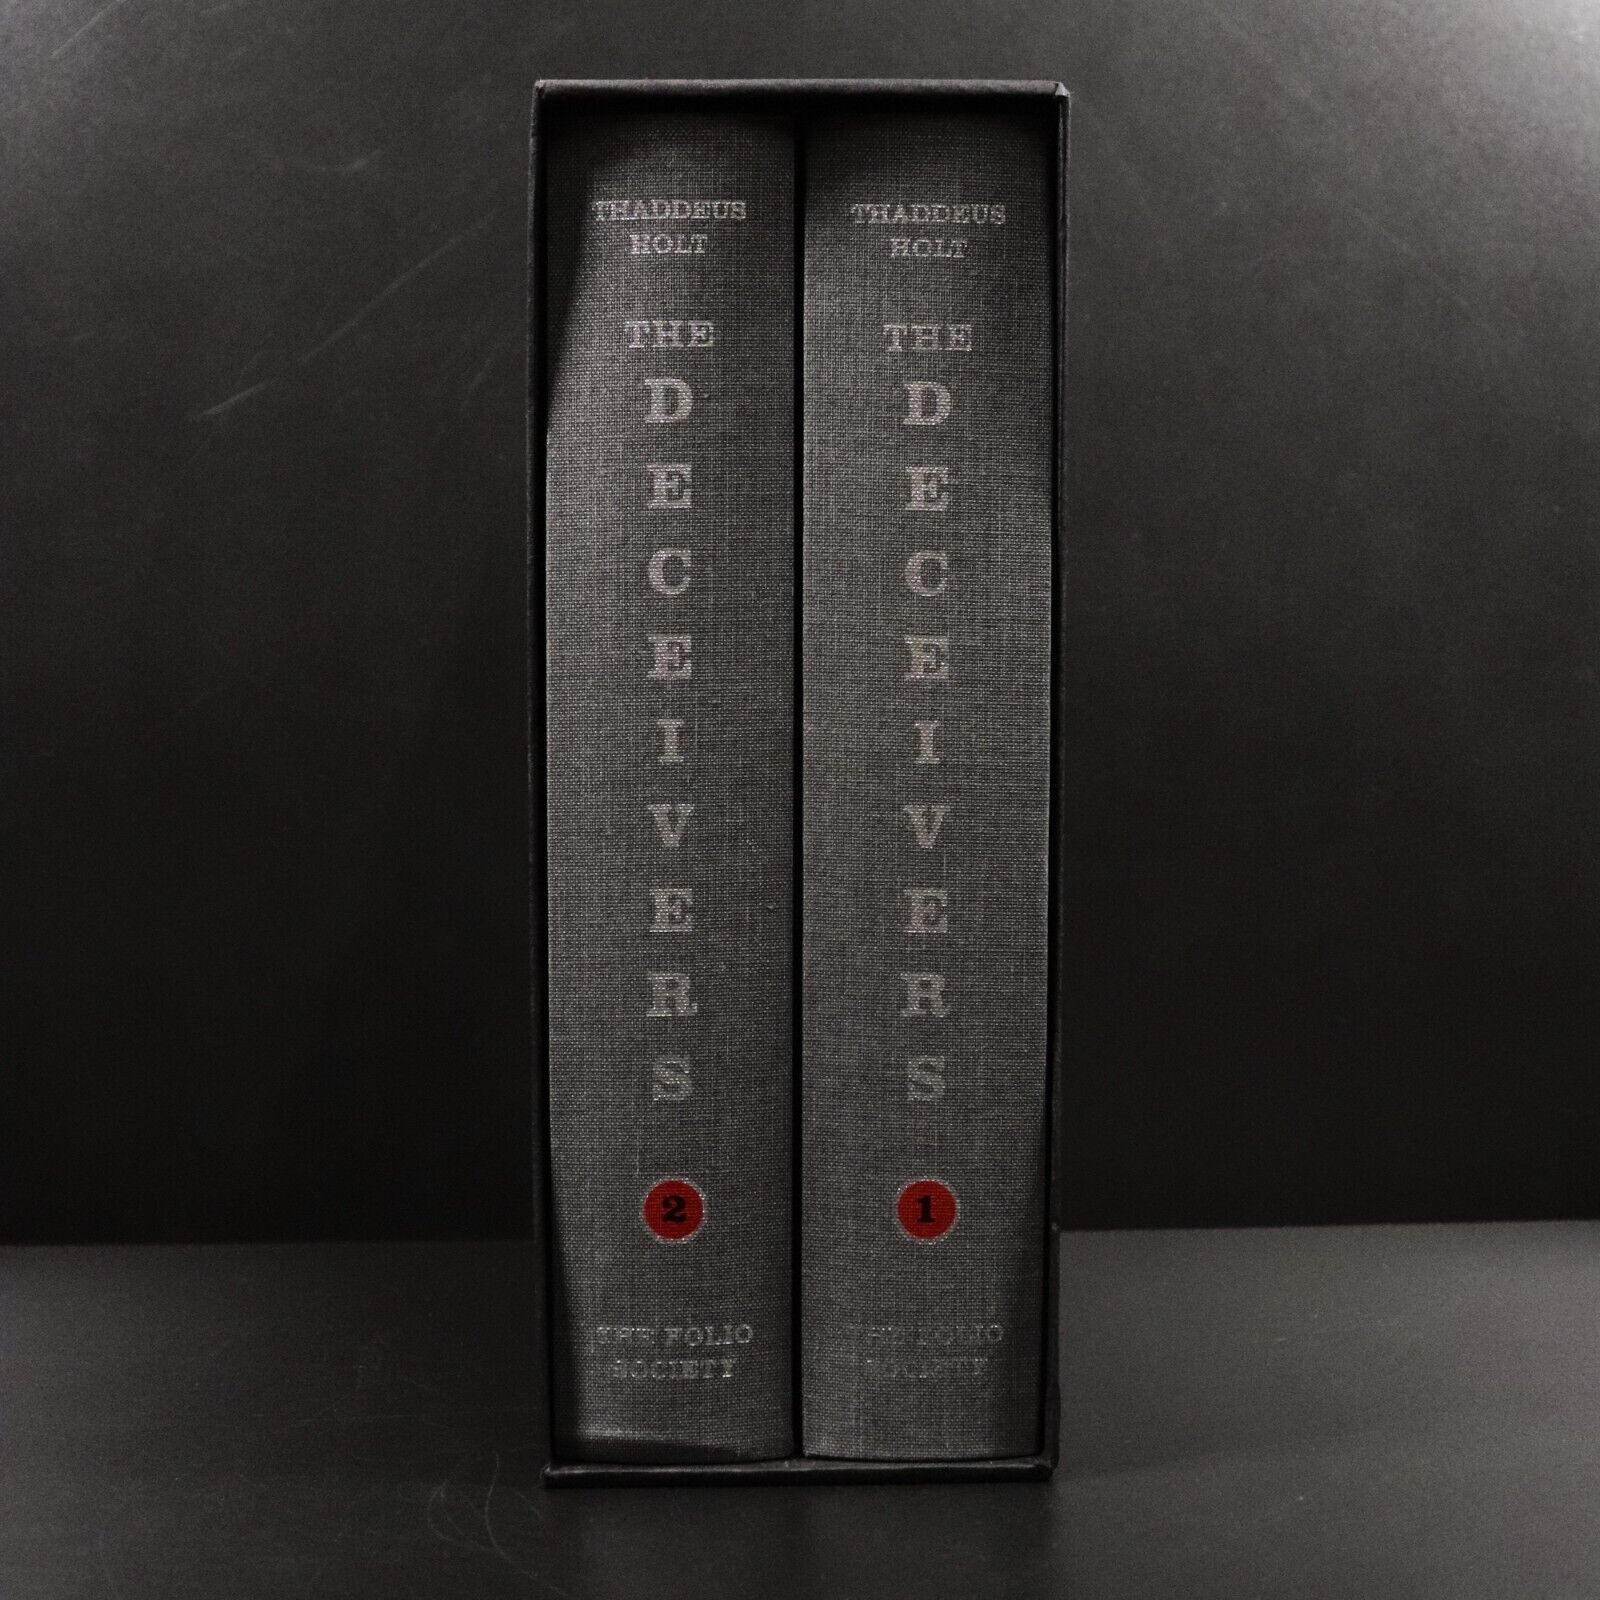 2008 2vol The Deceivers by Thaddeus Holt Folio Society WW2 Military History Book